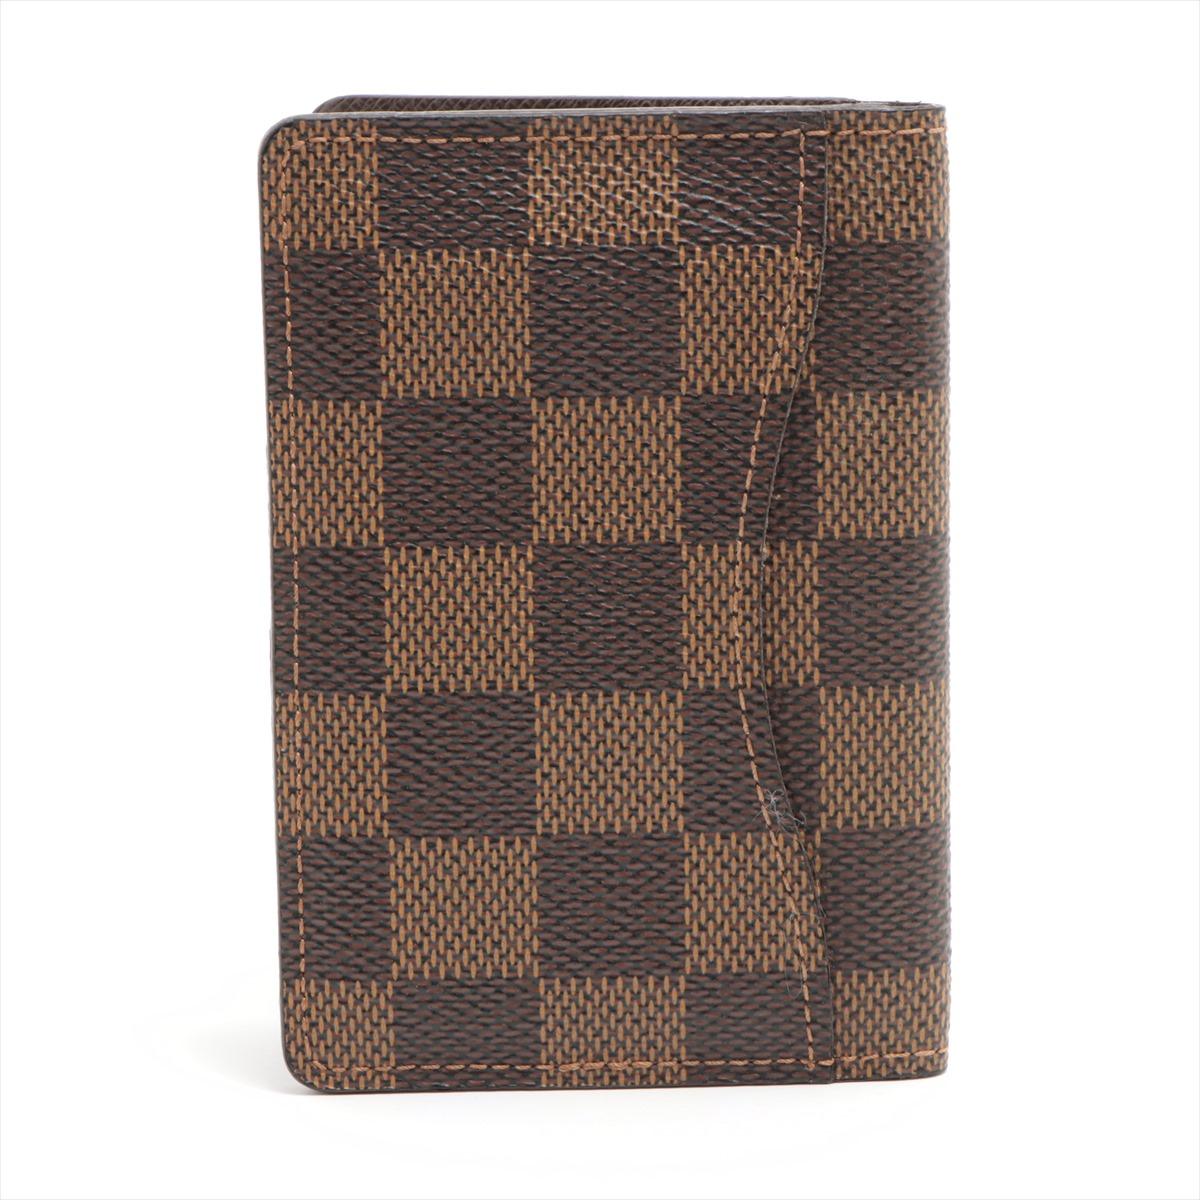 Louis Vuitton Damier Ebene Pocket Organizer In Good Condition For Sale In Indianapolis, IN